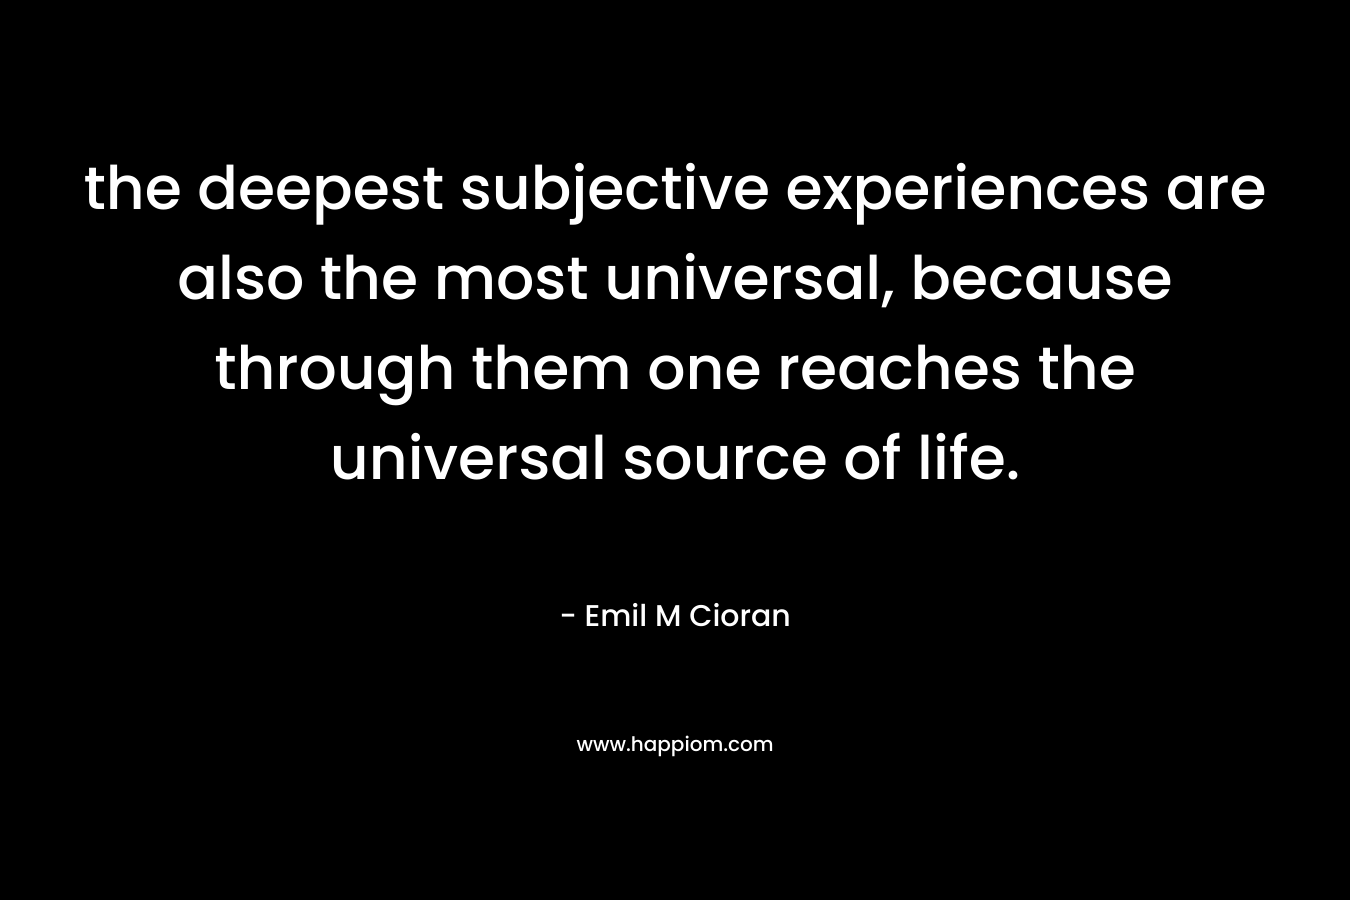 the deepest subjective experiences are also the most universal, because through them one reaches the universal source of life. – Emil M Cioran